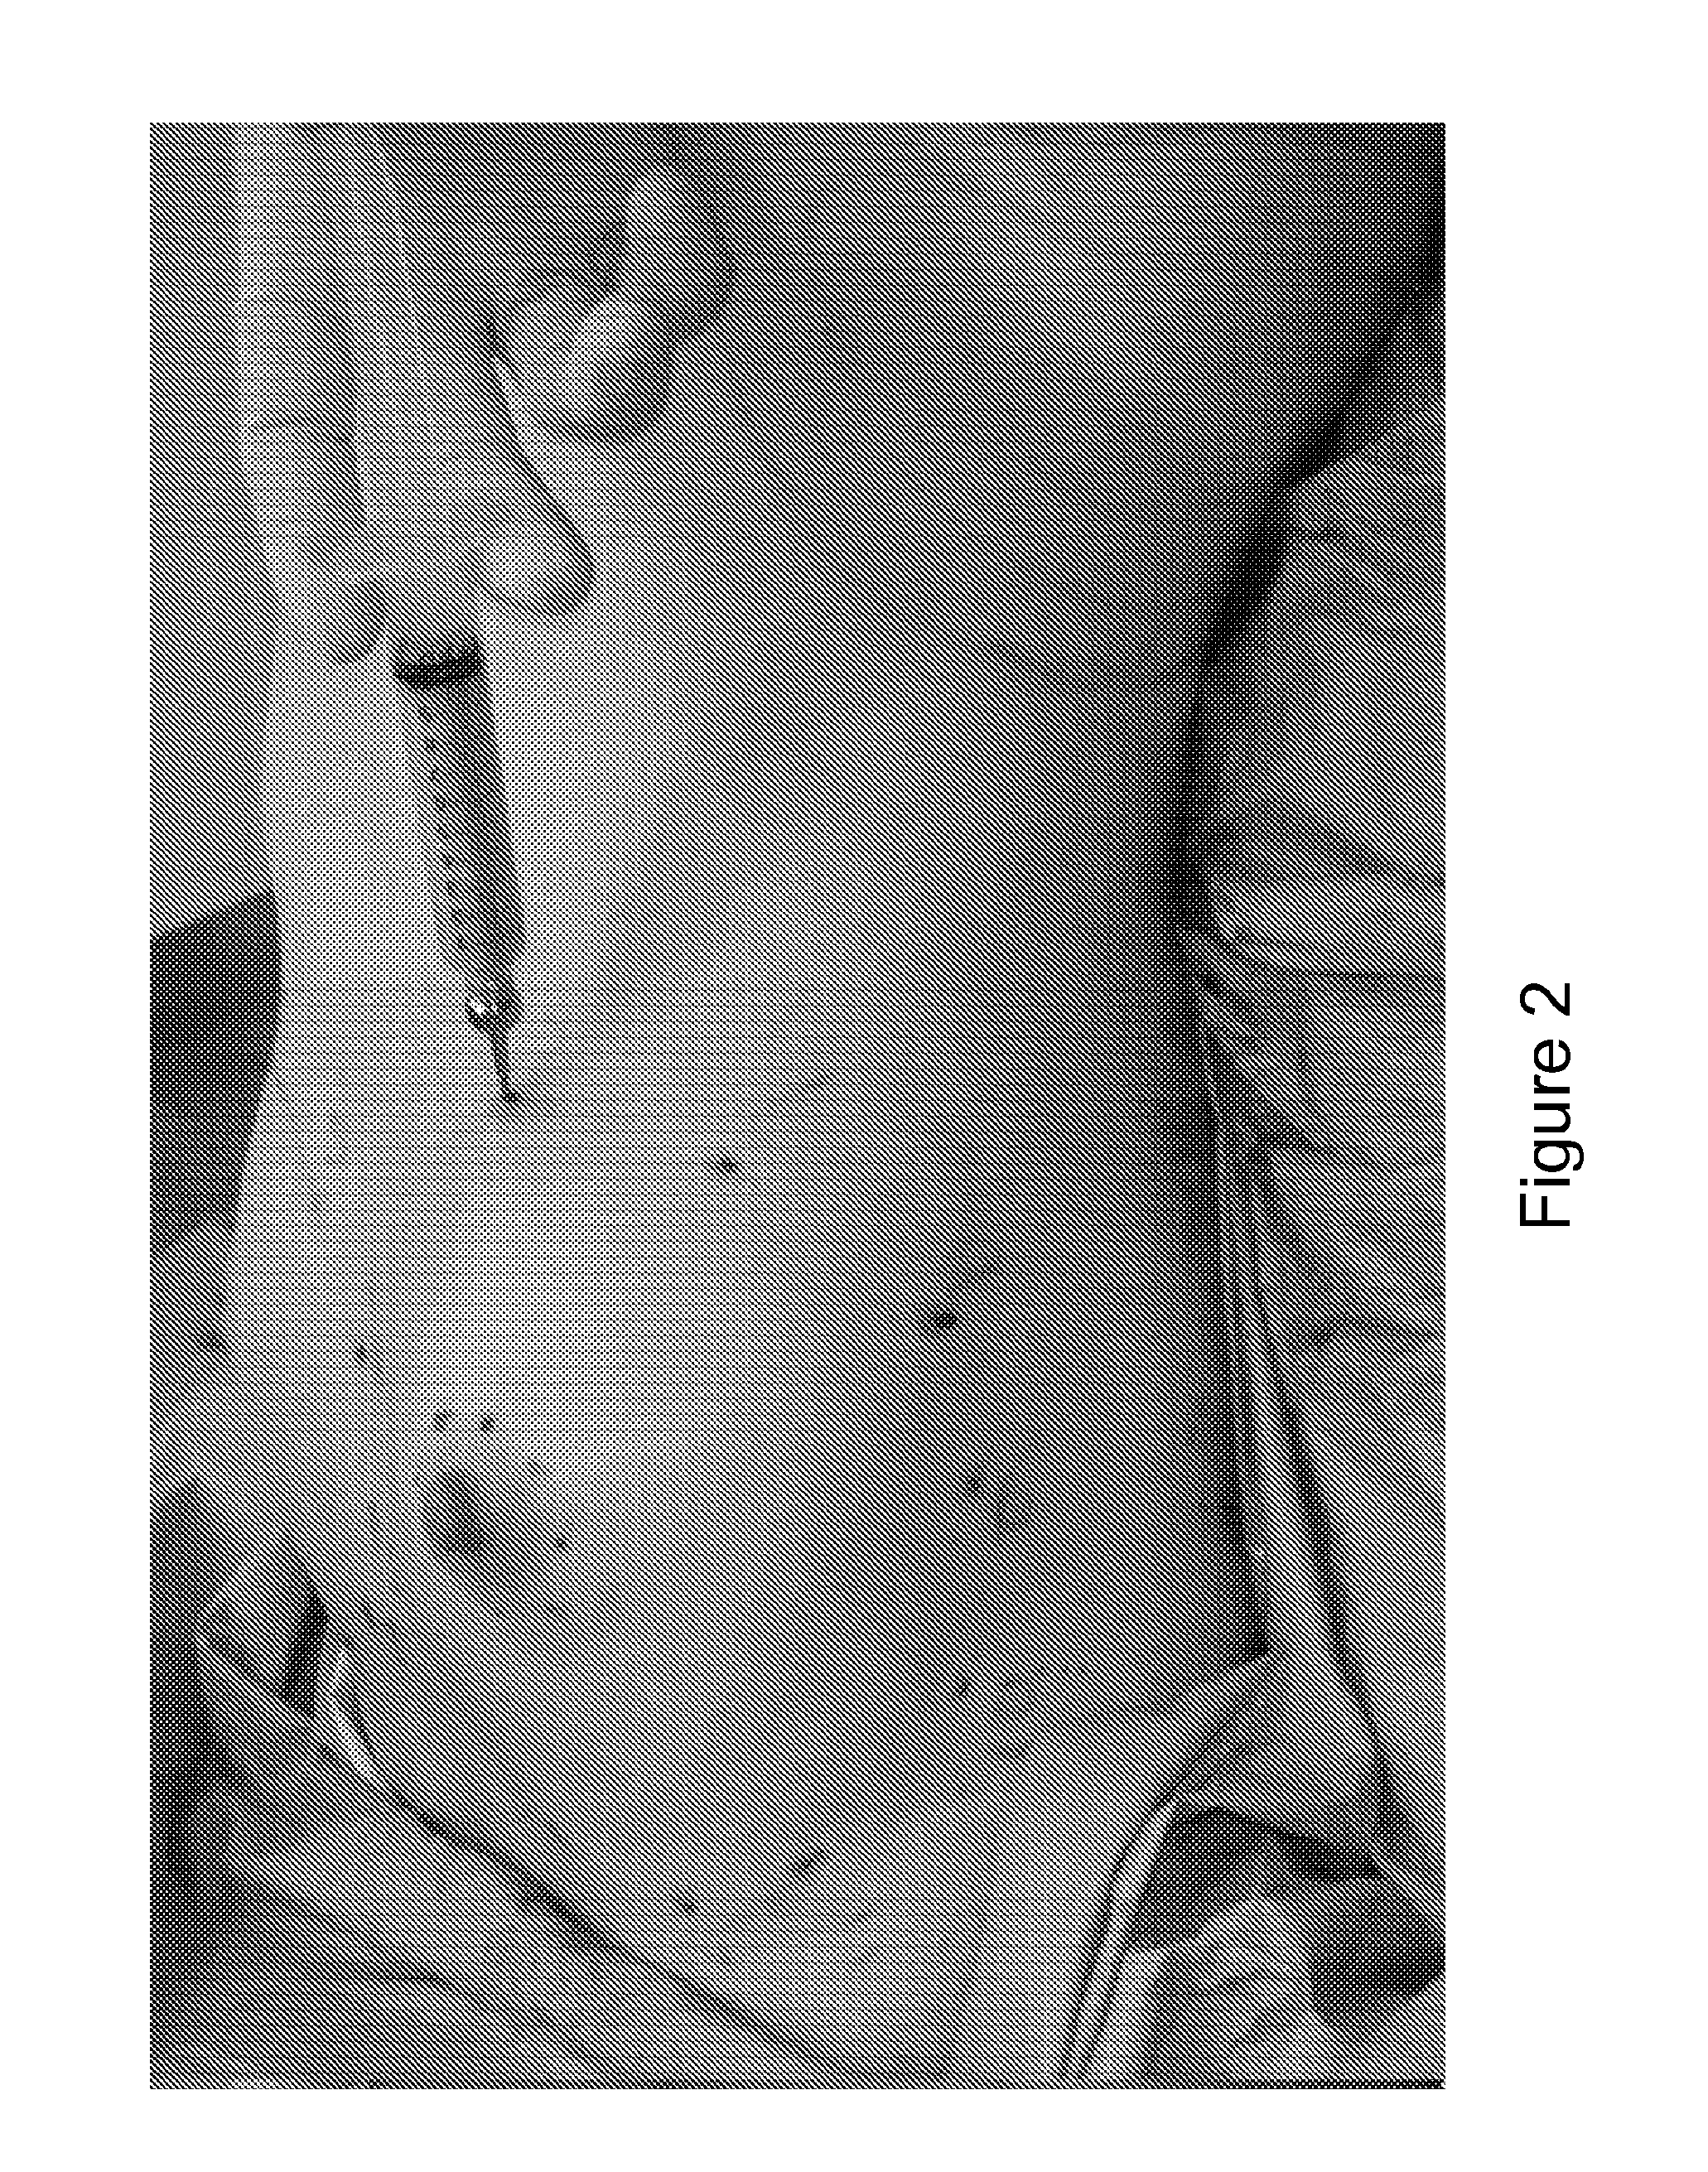 Method and system for preparing soft tissue for grafting, enhancing grafting results, and grafting autologous fat and adipocyte derived stem cells to soft tissue such as the breast and other tissue defects